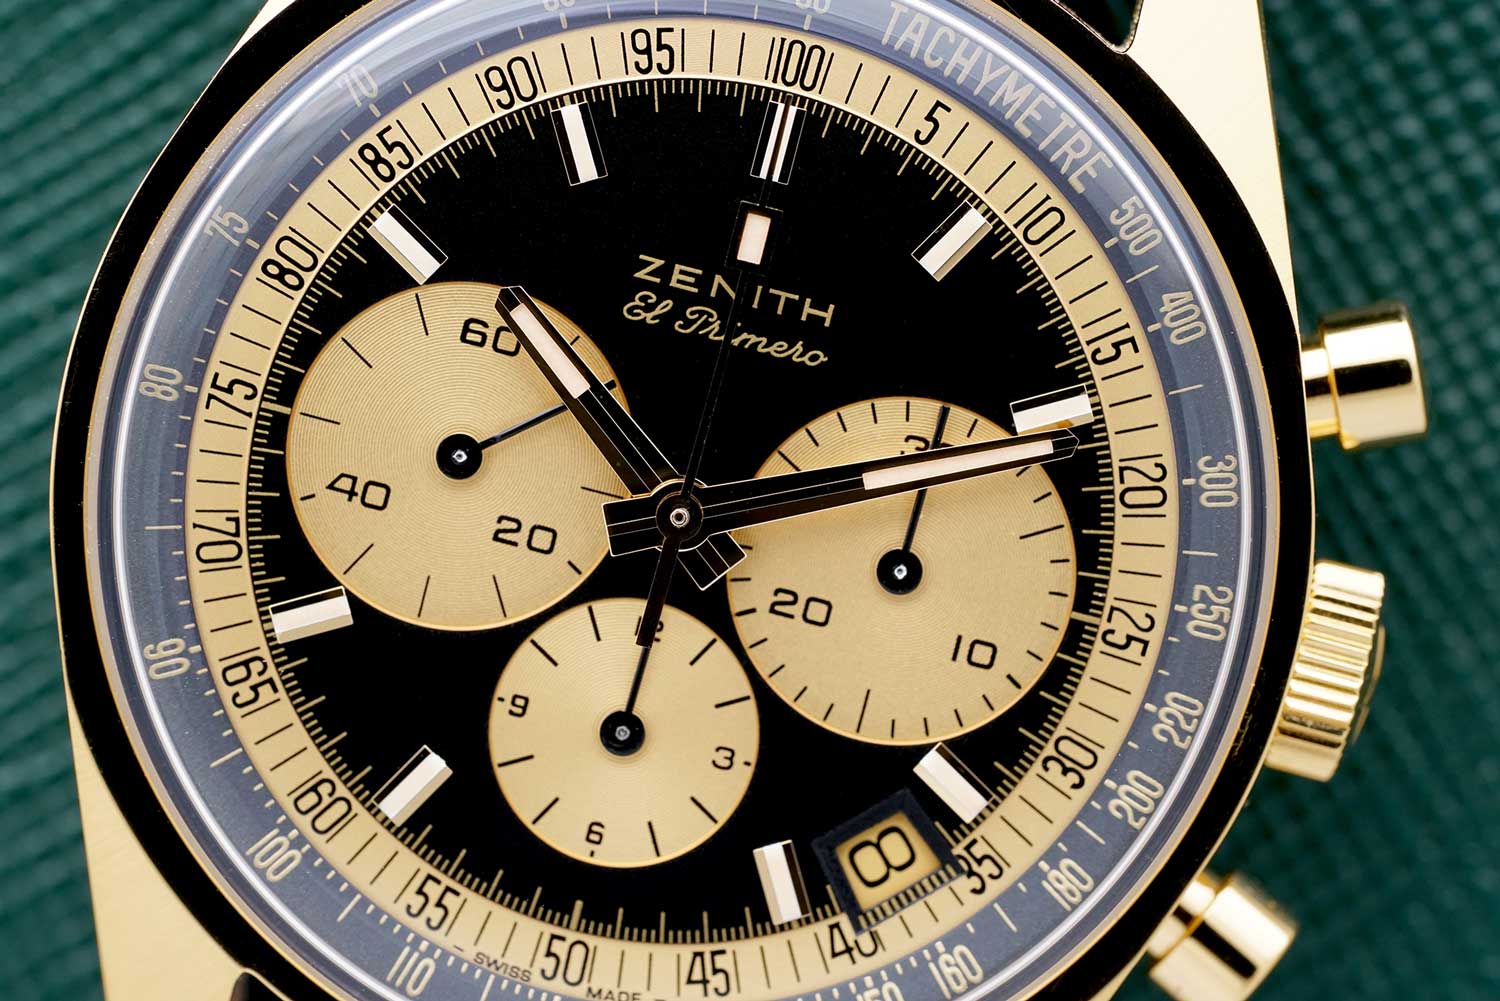 El Primero A386 Revival – Yellow Gold (Image: Phillips Watches)